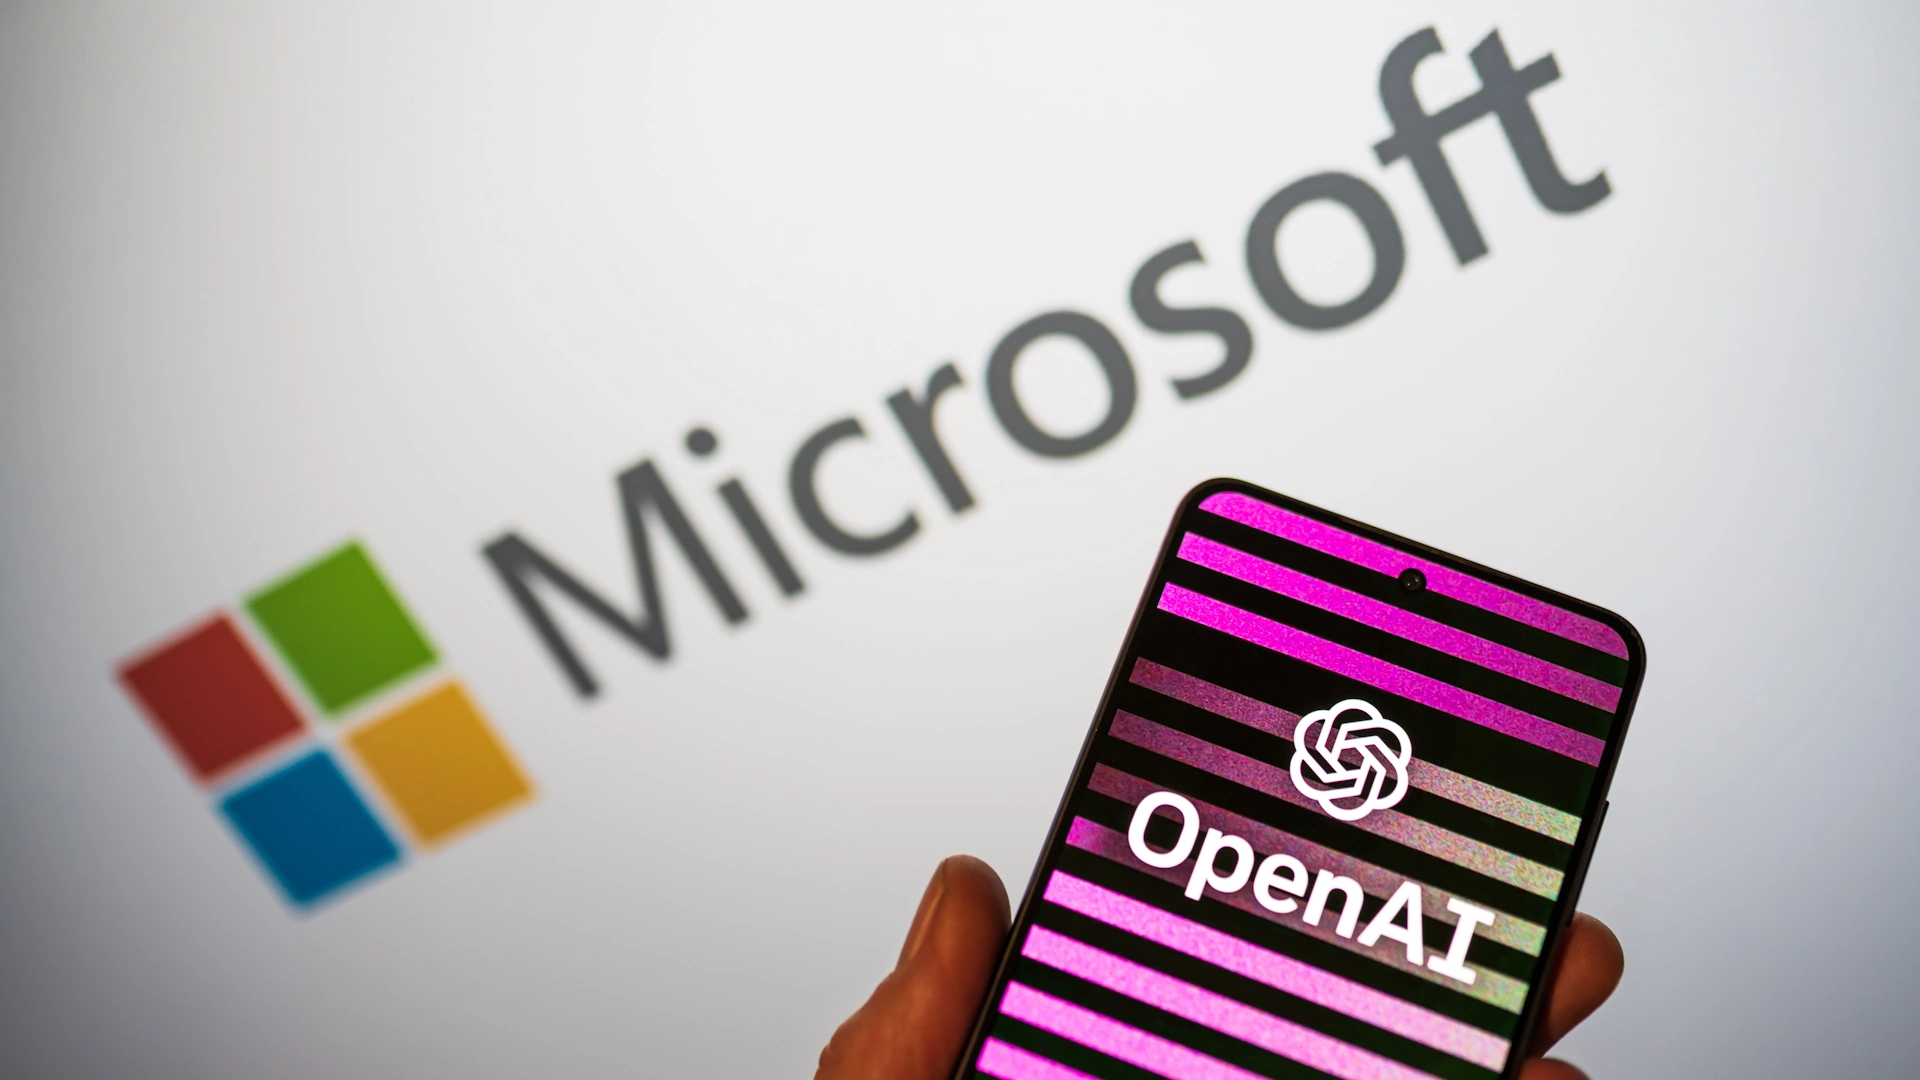 Microsoft’s connection with the OpenAI startup has become the subject of British competition regulators